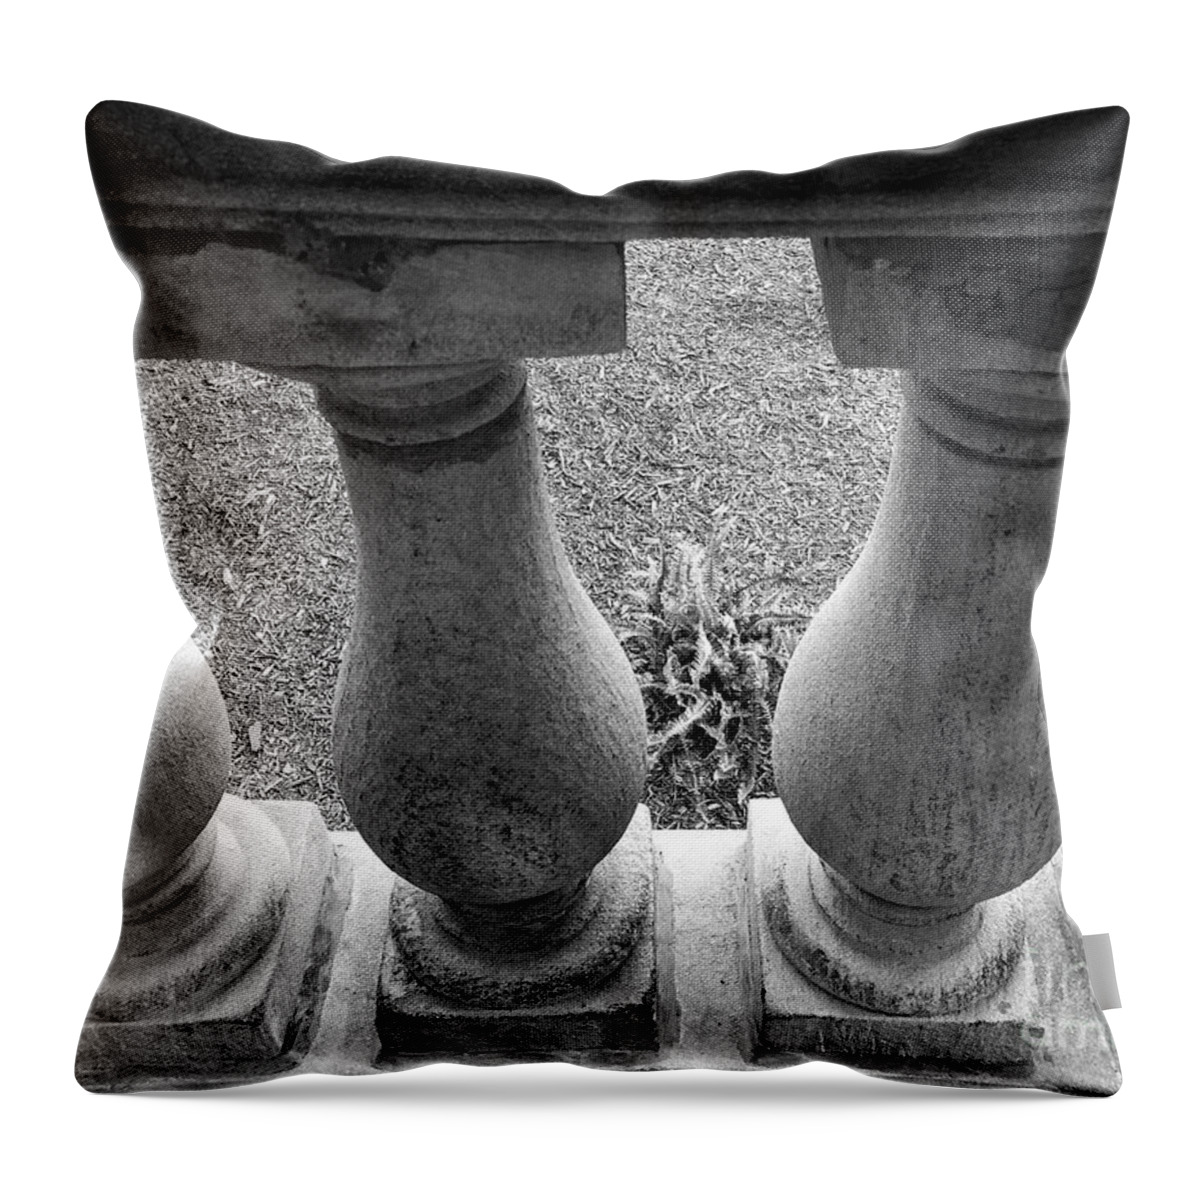 Baluster Throw Pillow featuring the photograph Baluster Art - Study I by Doc Braham